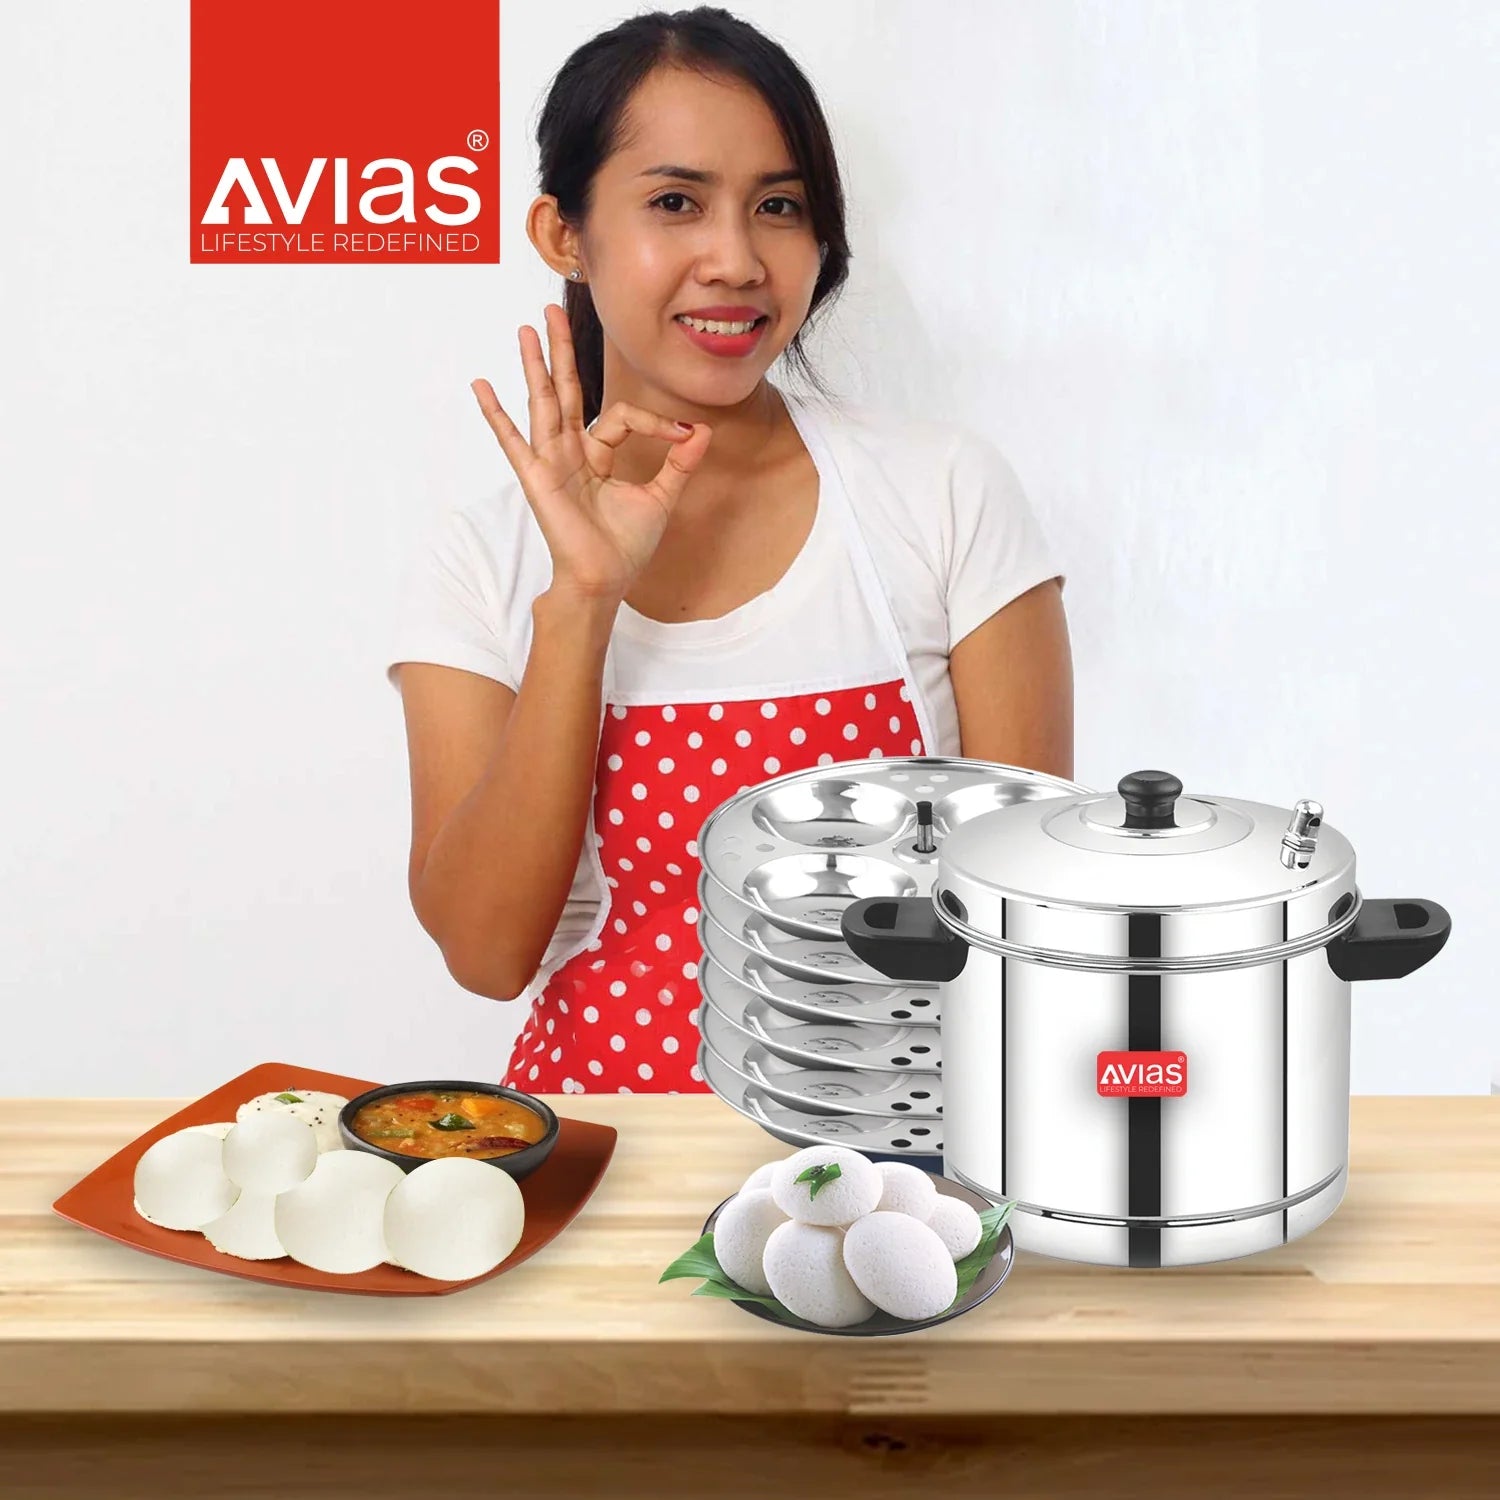 AVIAS stainless steel Idly cooker/ Idly maker/ Idly pot with Bakelite handles for fresh idlis to cook in the kitchen